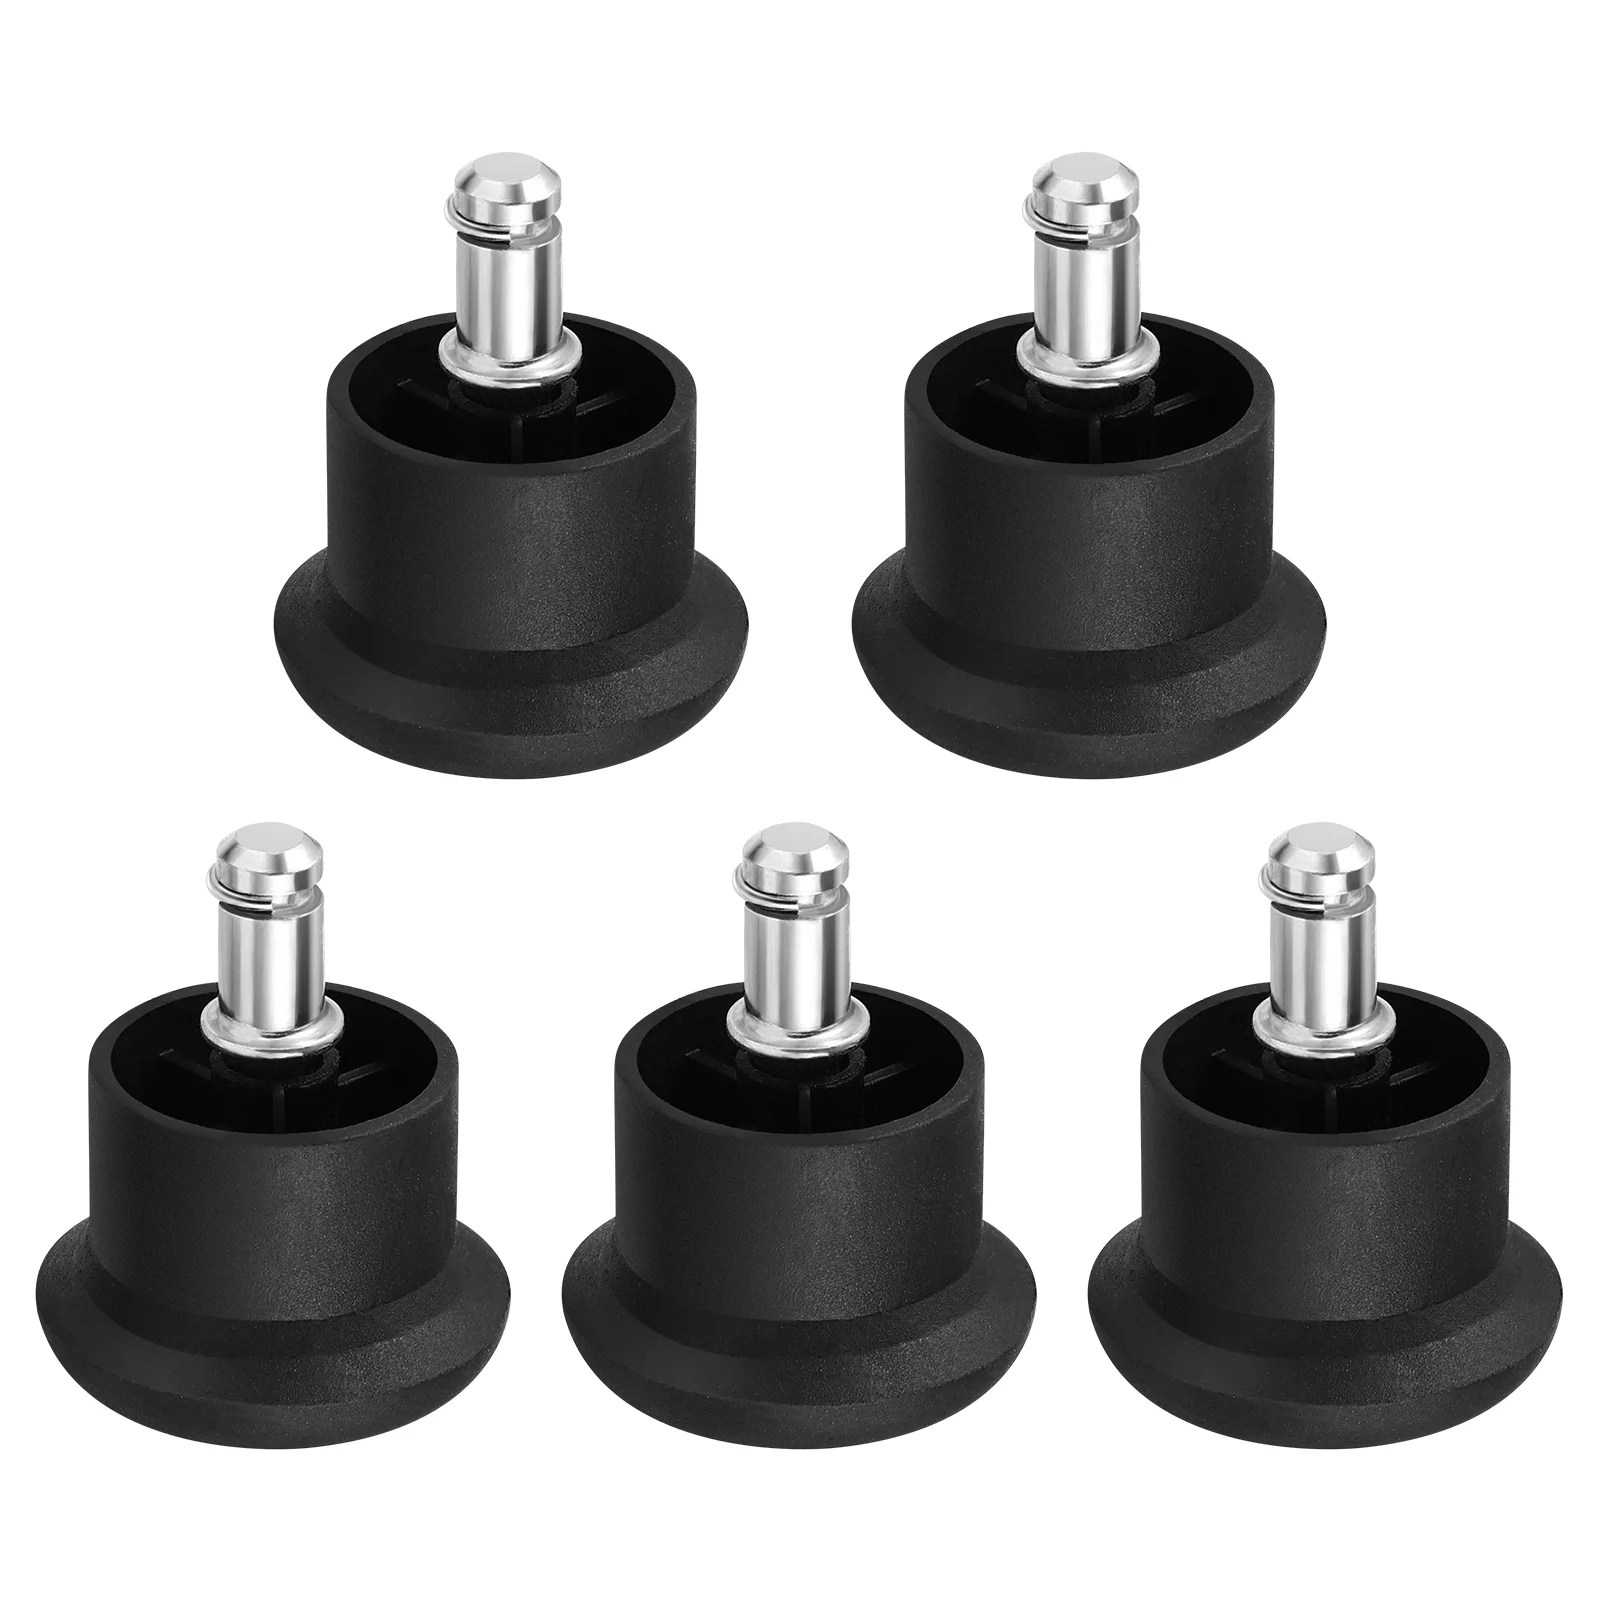 

VOSAREA 5pcs Chair Caster Wheels Heavy Duty & Safe Chair Wheels Stopper Fixed Stationary Castors Office Chair Foot Glides